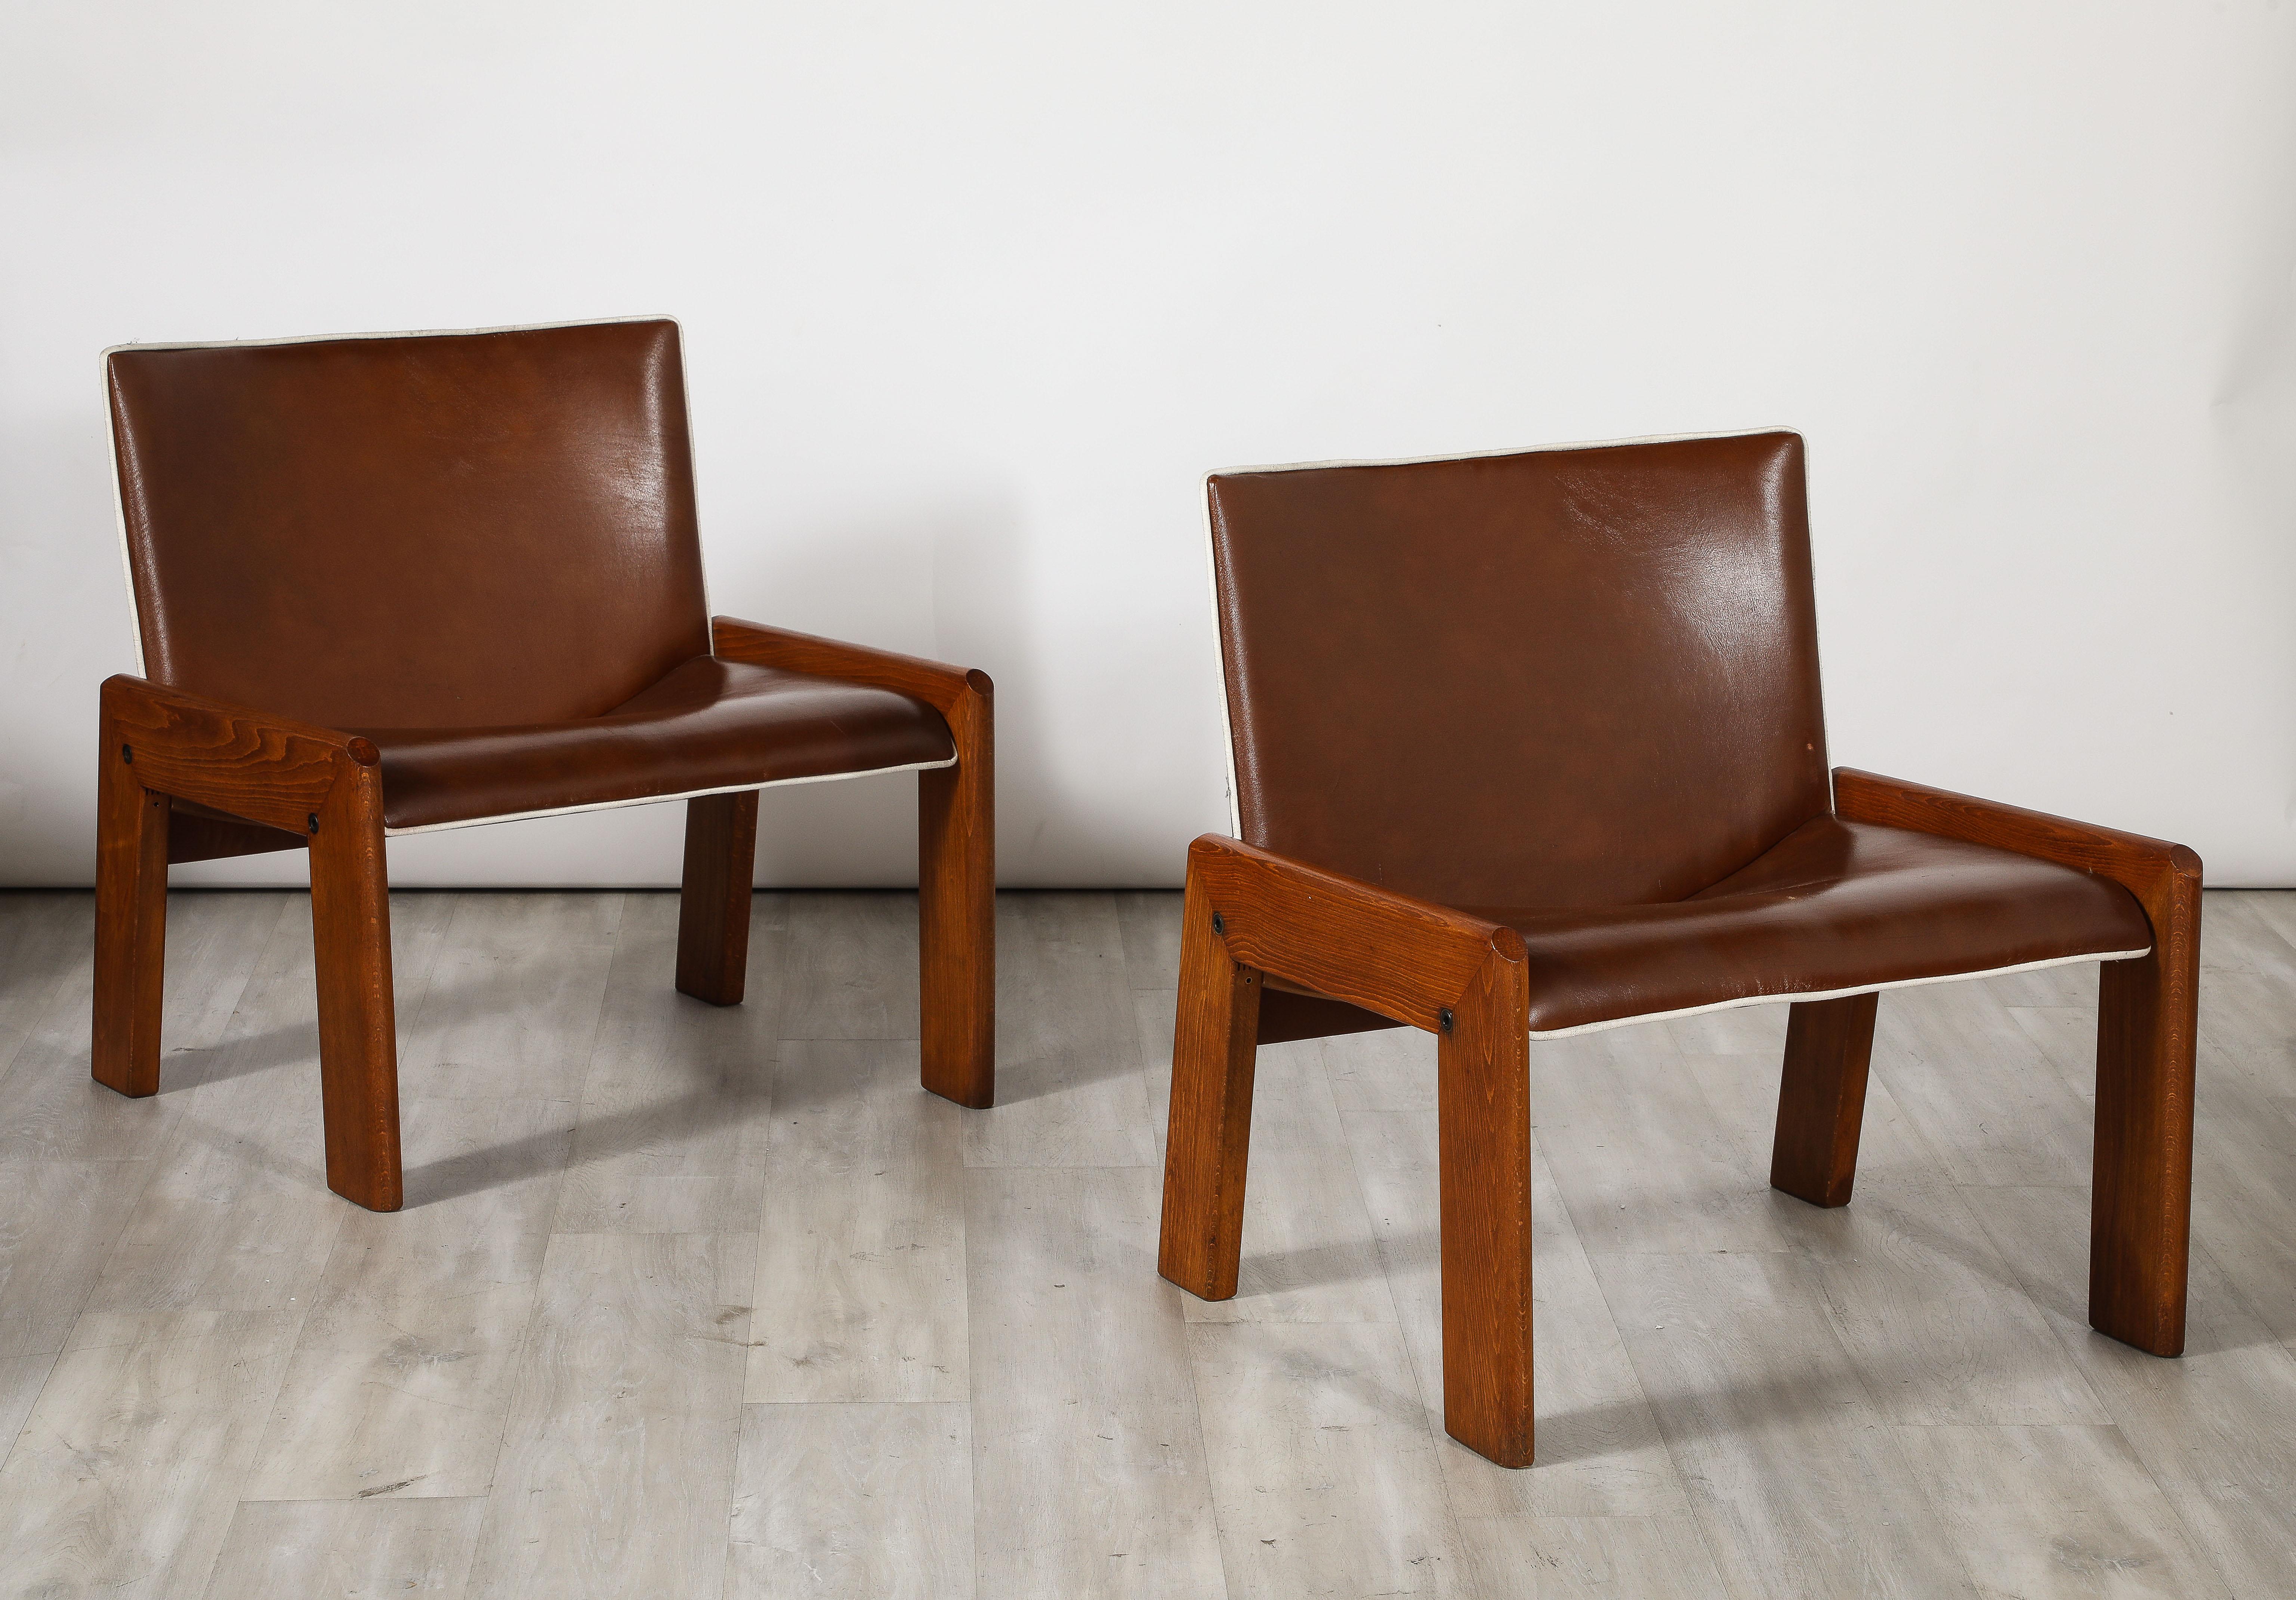 Modern Pair of Leather Side Chairs by B&T Salotti, Italy, circa 1970 For Sale